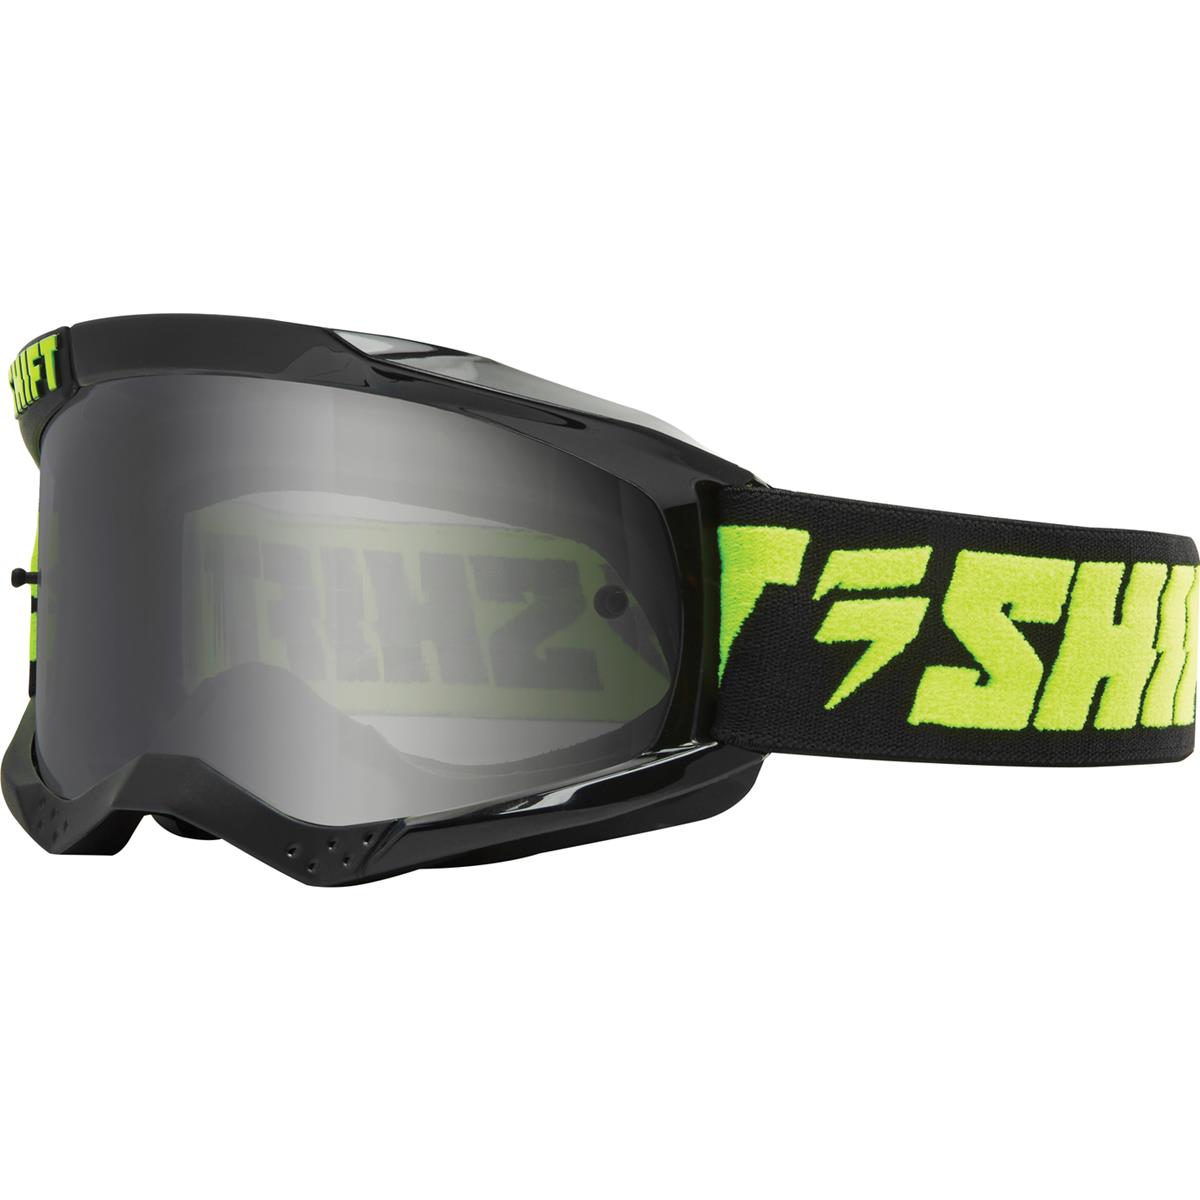 Shift Goggle Whit3 Label Fluo Yellow - Anti-Fog